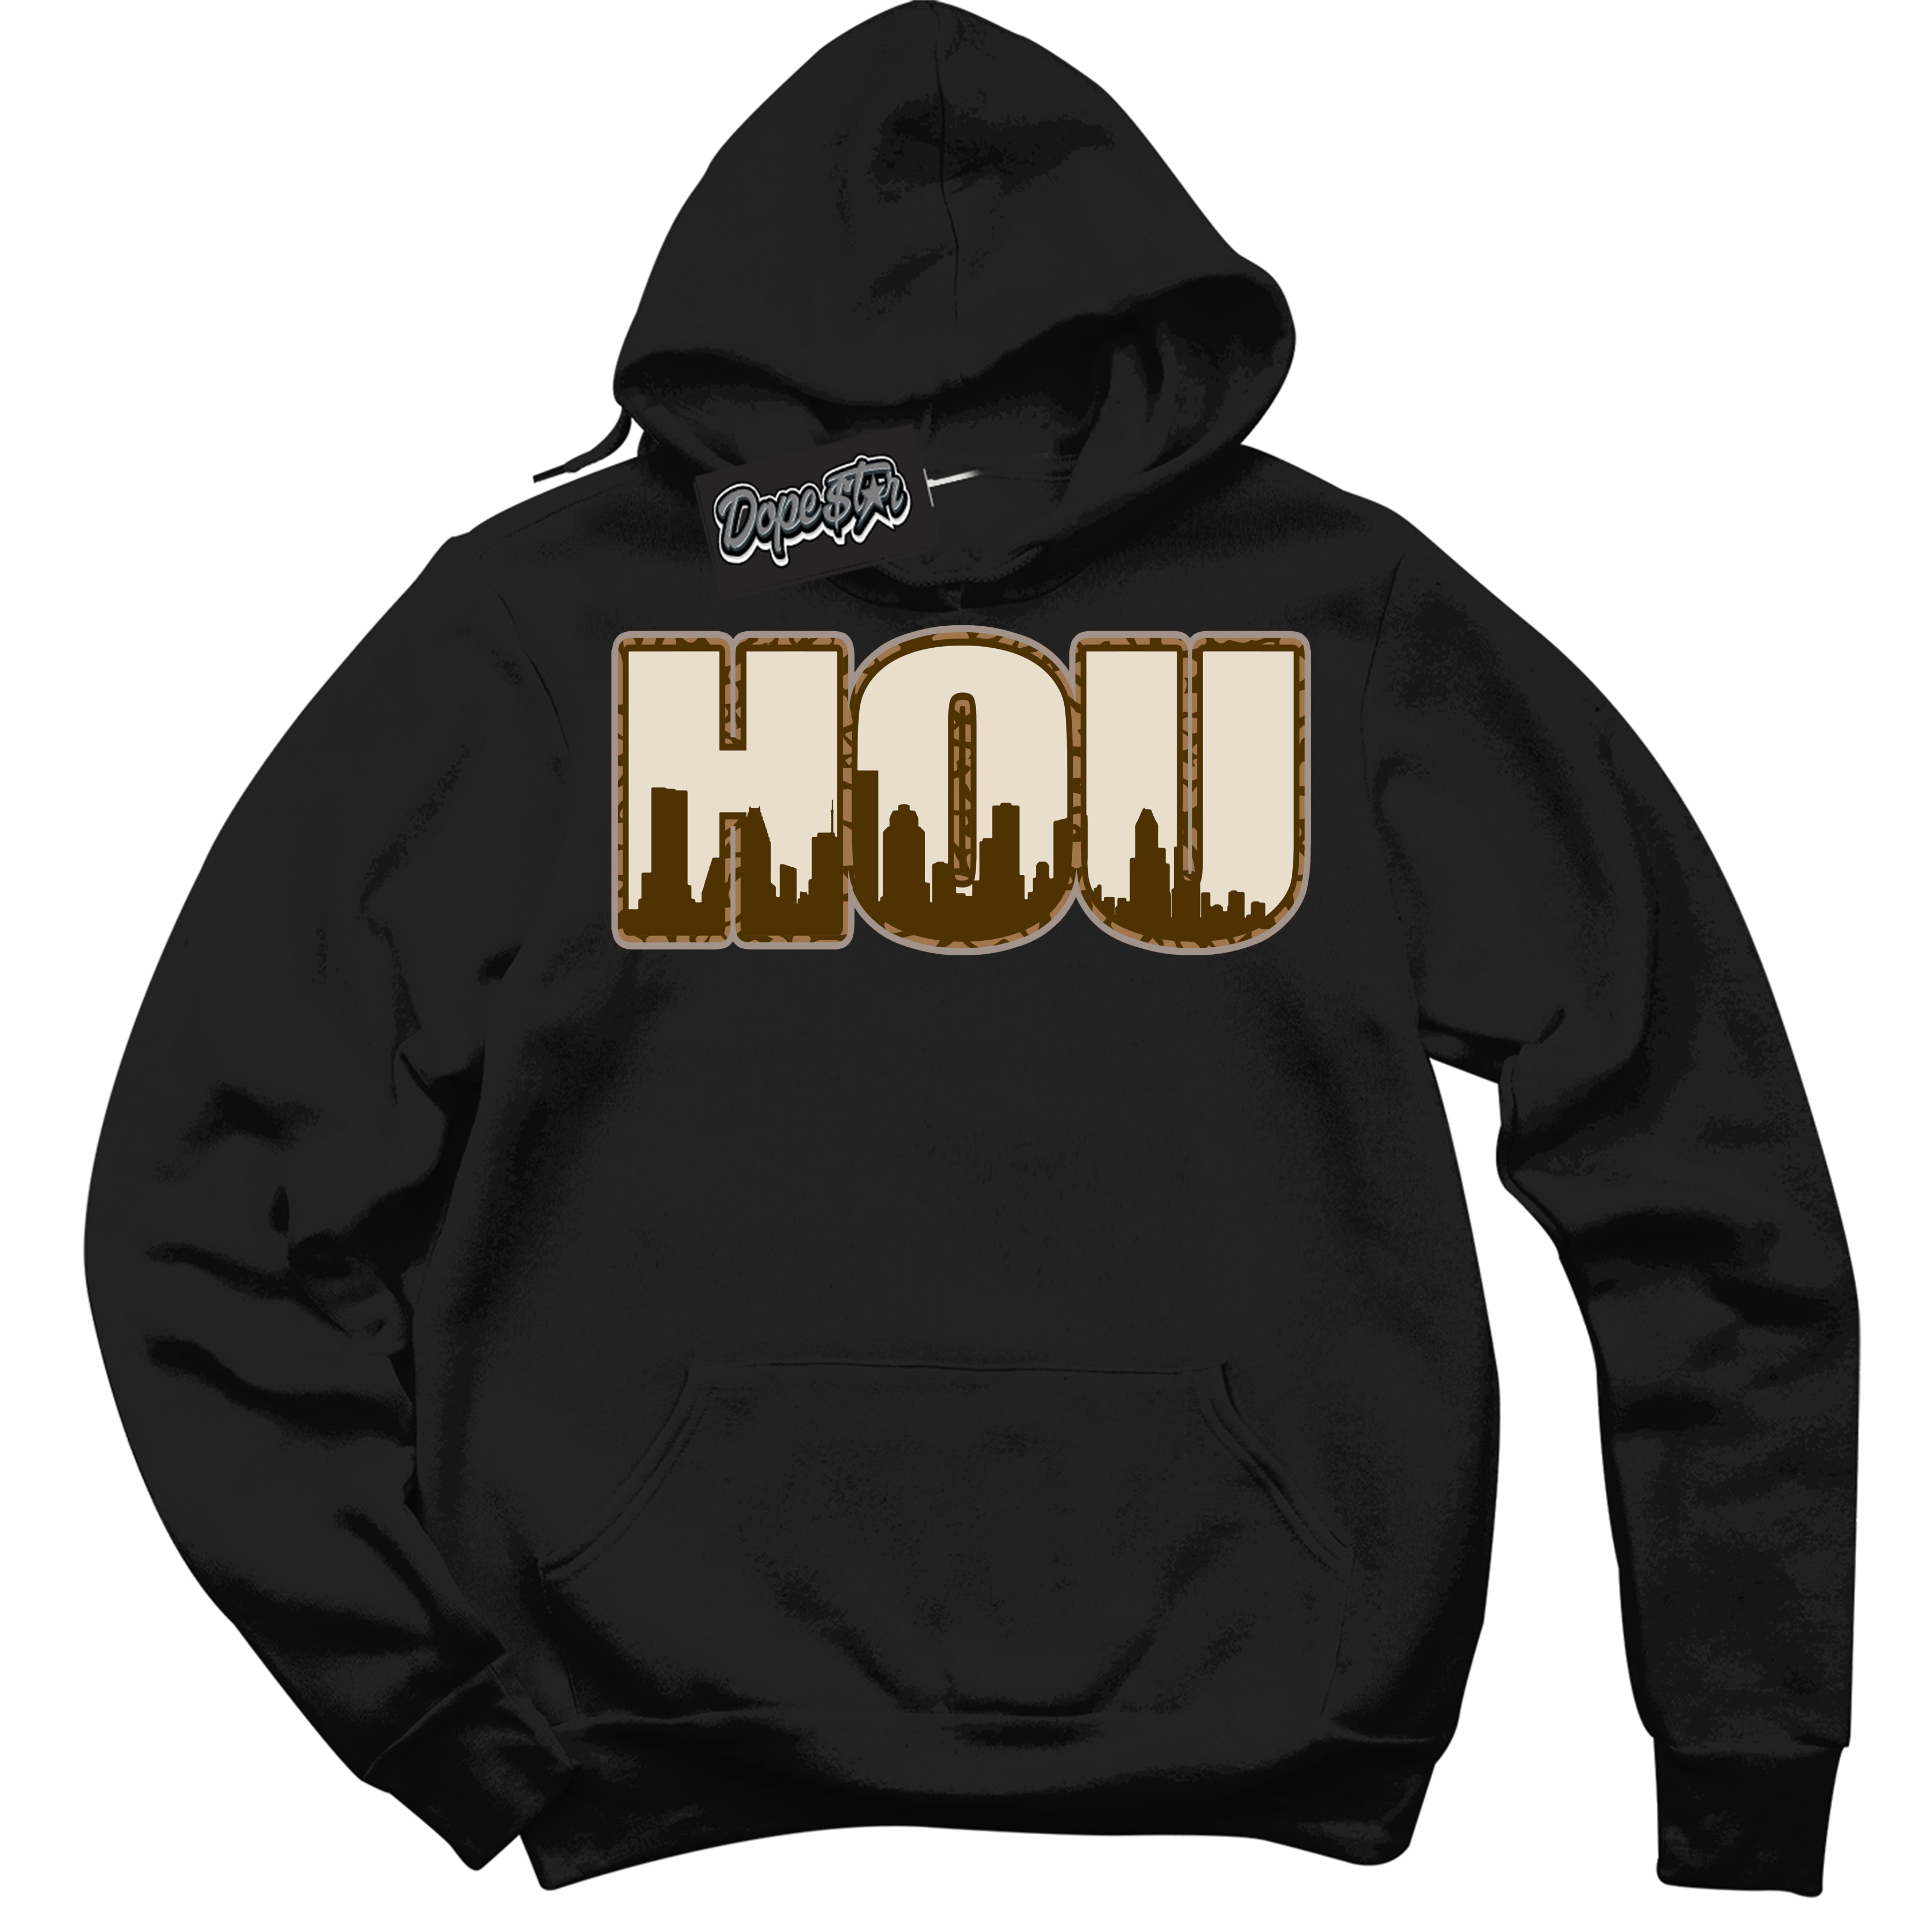 Cool Black Graphic DopeStar Hoodie with “ Houston “ print, that perfectly matches Palomino 3s sneakers